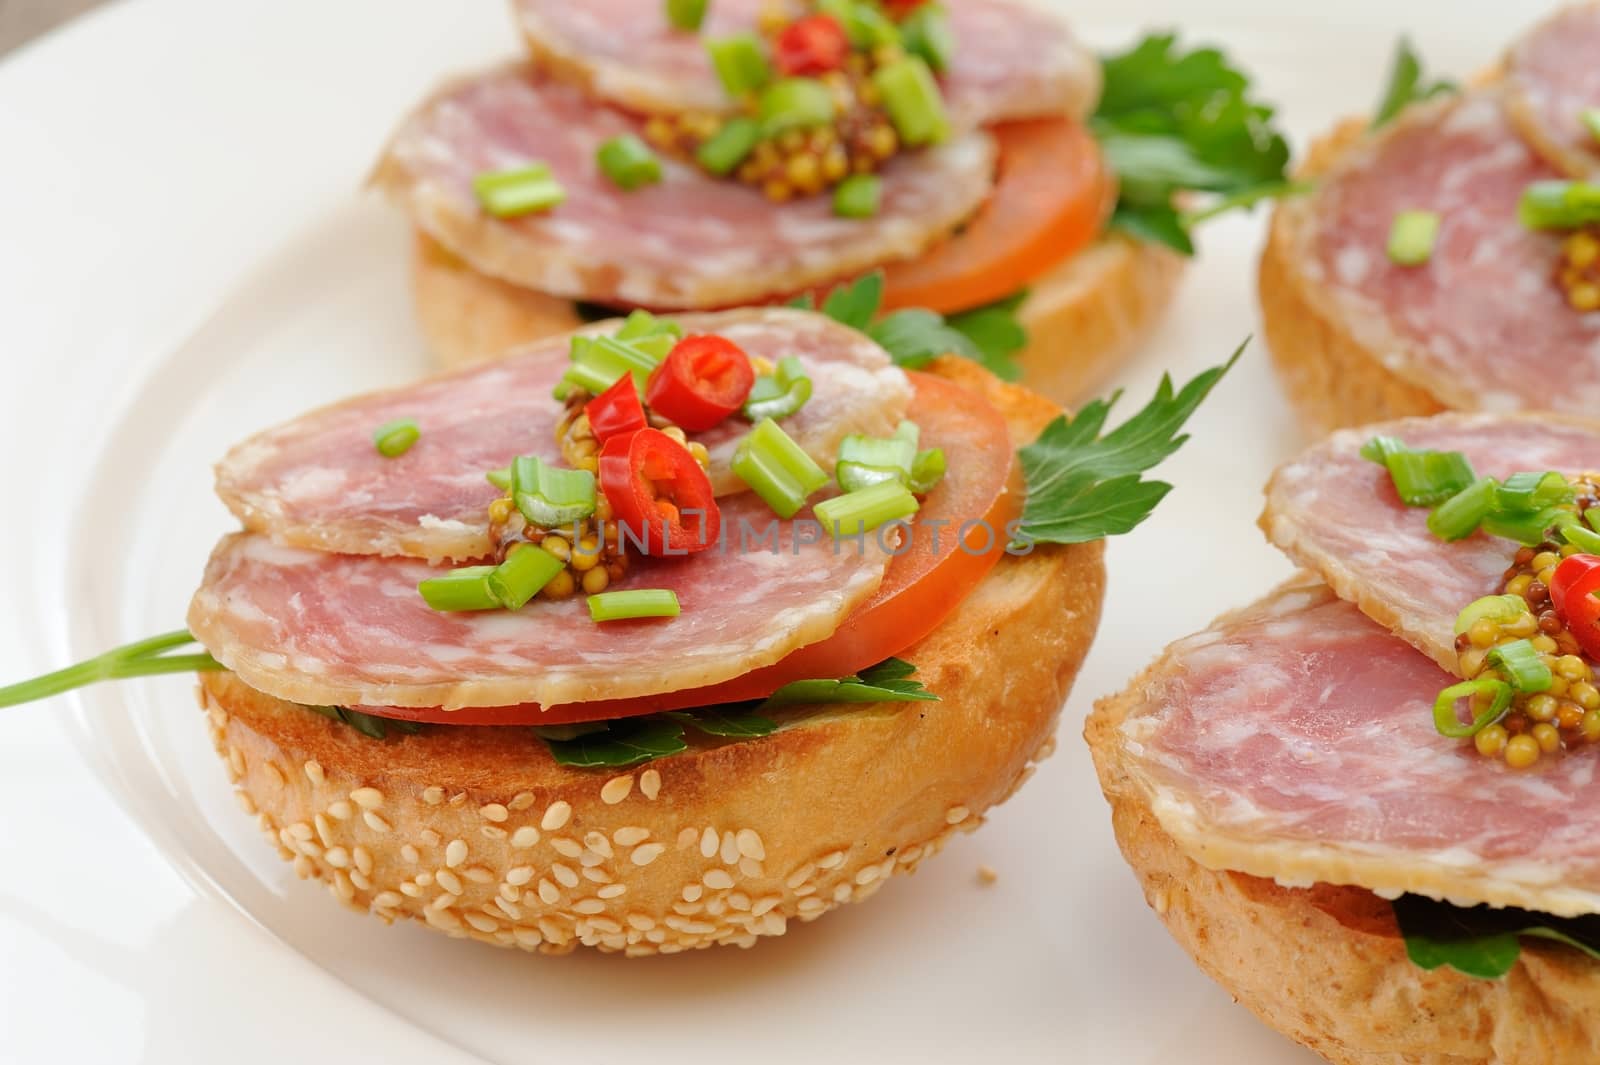 Ham sandwiches with chili, parsley and scallion on white plate c by Borodin